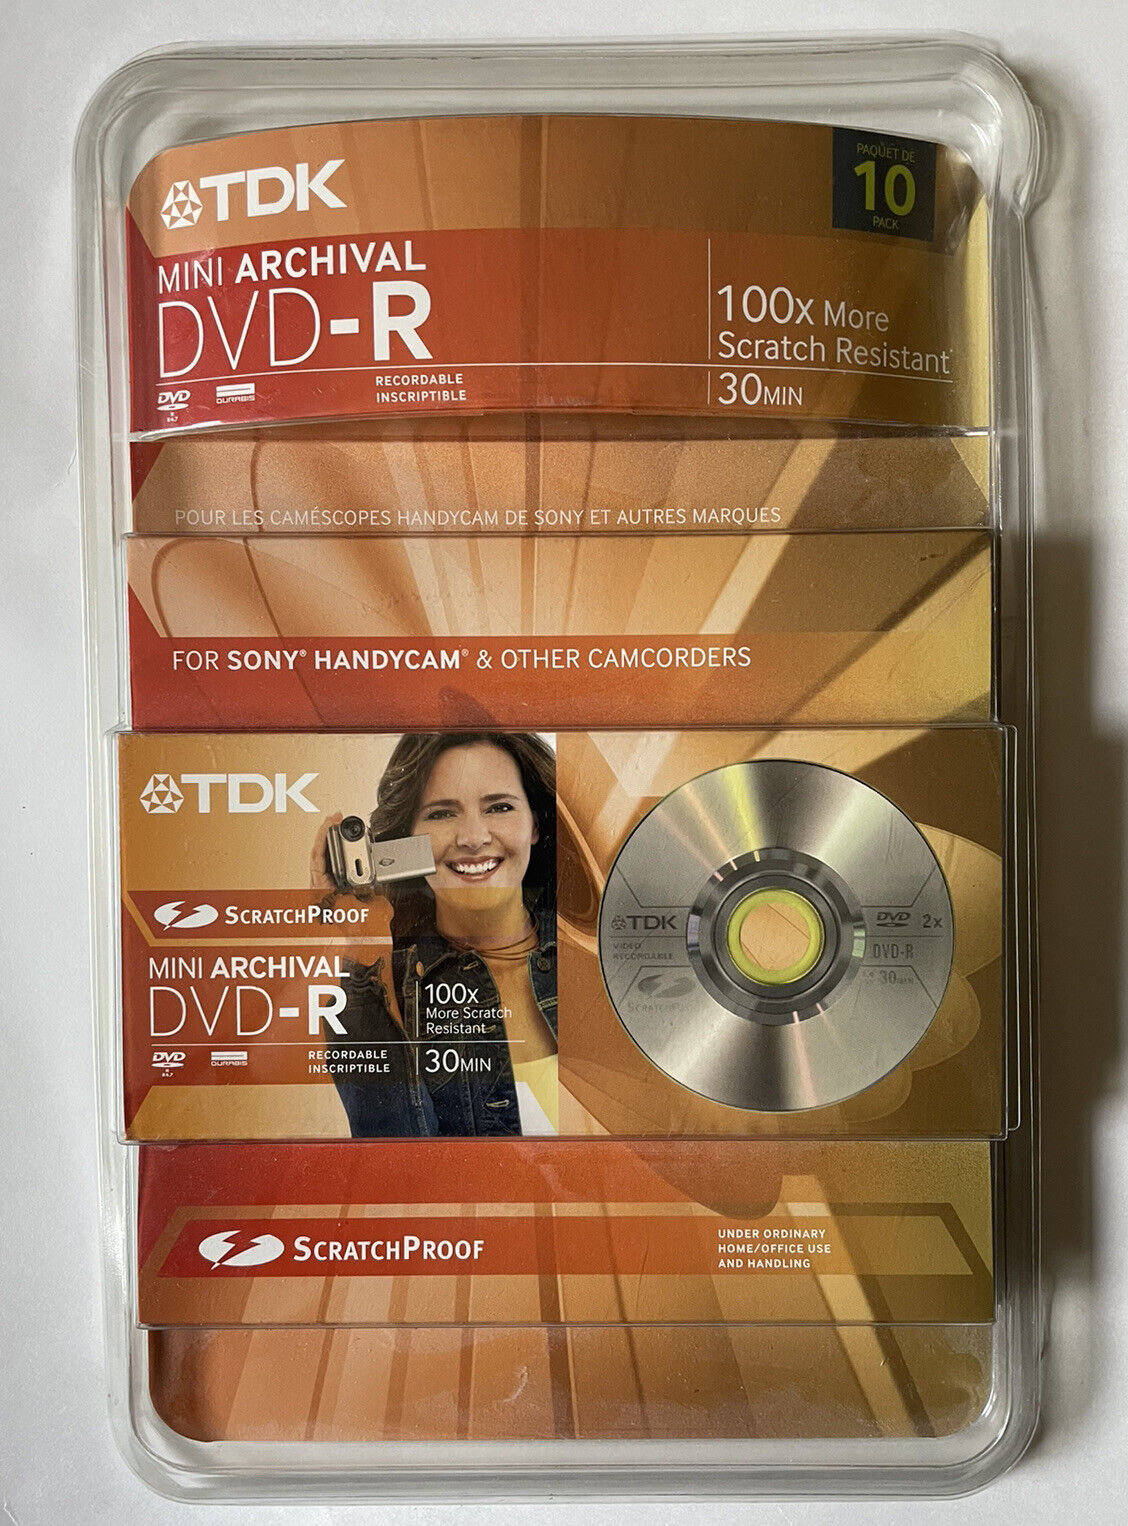 TDK Mini Archival DVD-R 10 Pack 30 Min Record Scratch Proof For Sony Handycam